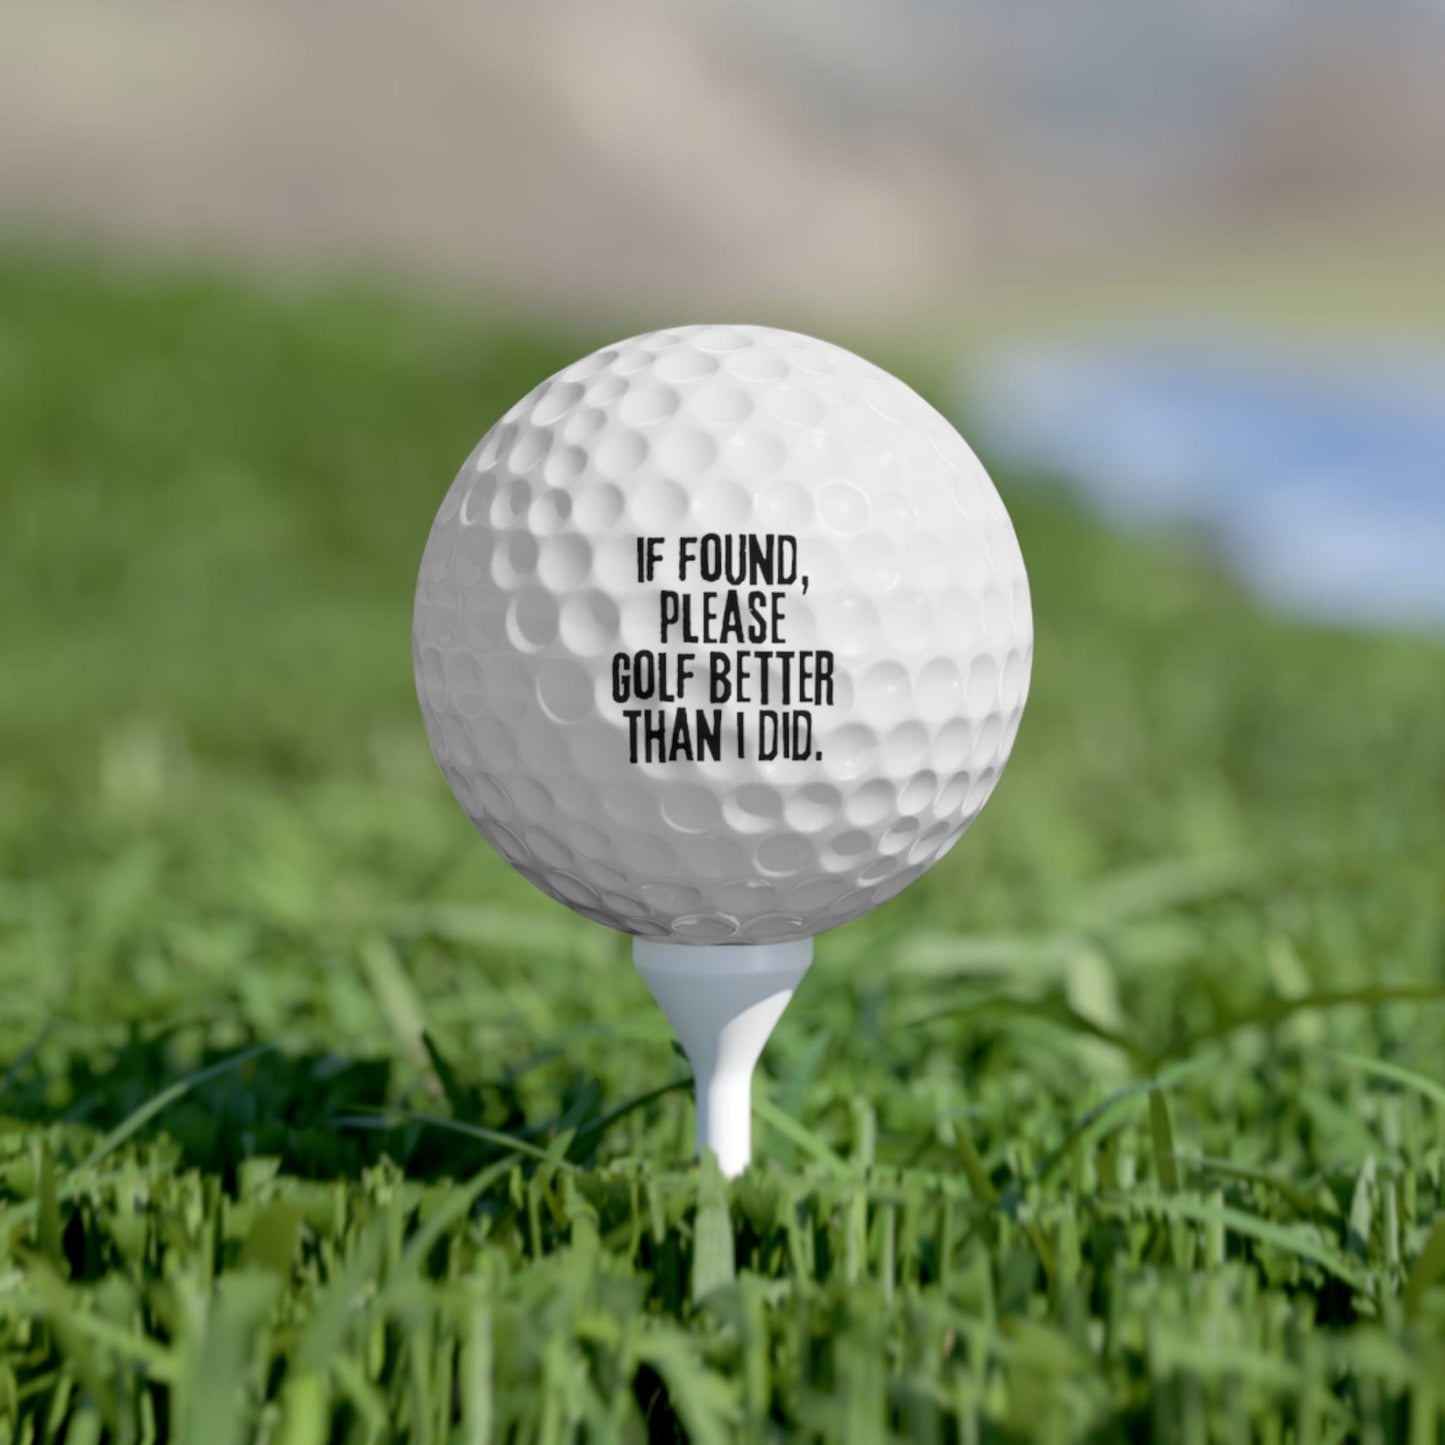 Funny Golfer Gifts  Accessories 1.7" / 6 pcs If Found Please Golf Better Than I Did Golf Balls, 6 Piece Set